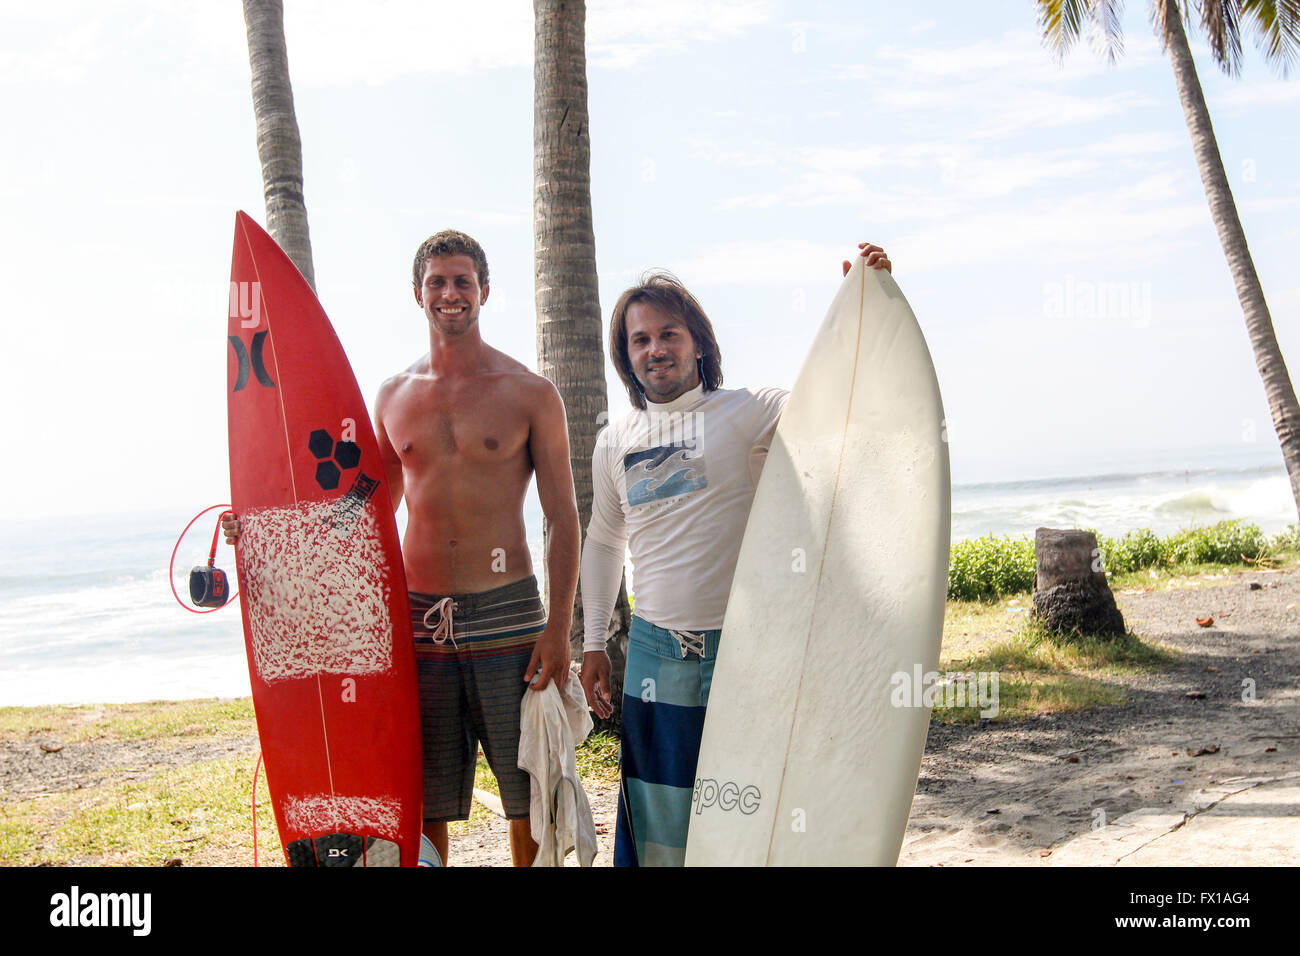 Two surfers with surfboards photographed at El Tunco beach, El Salvador Stock Photo